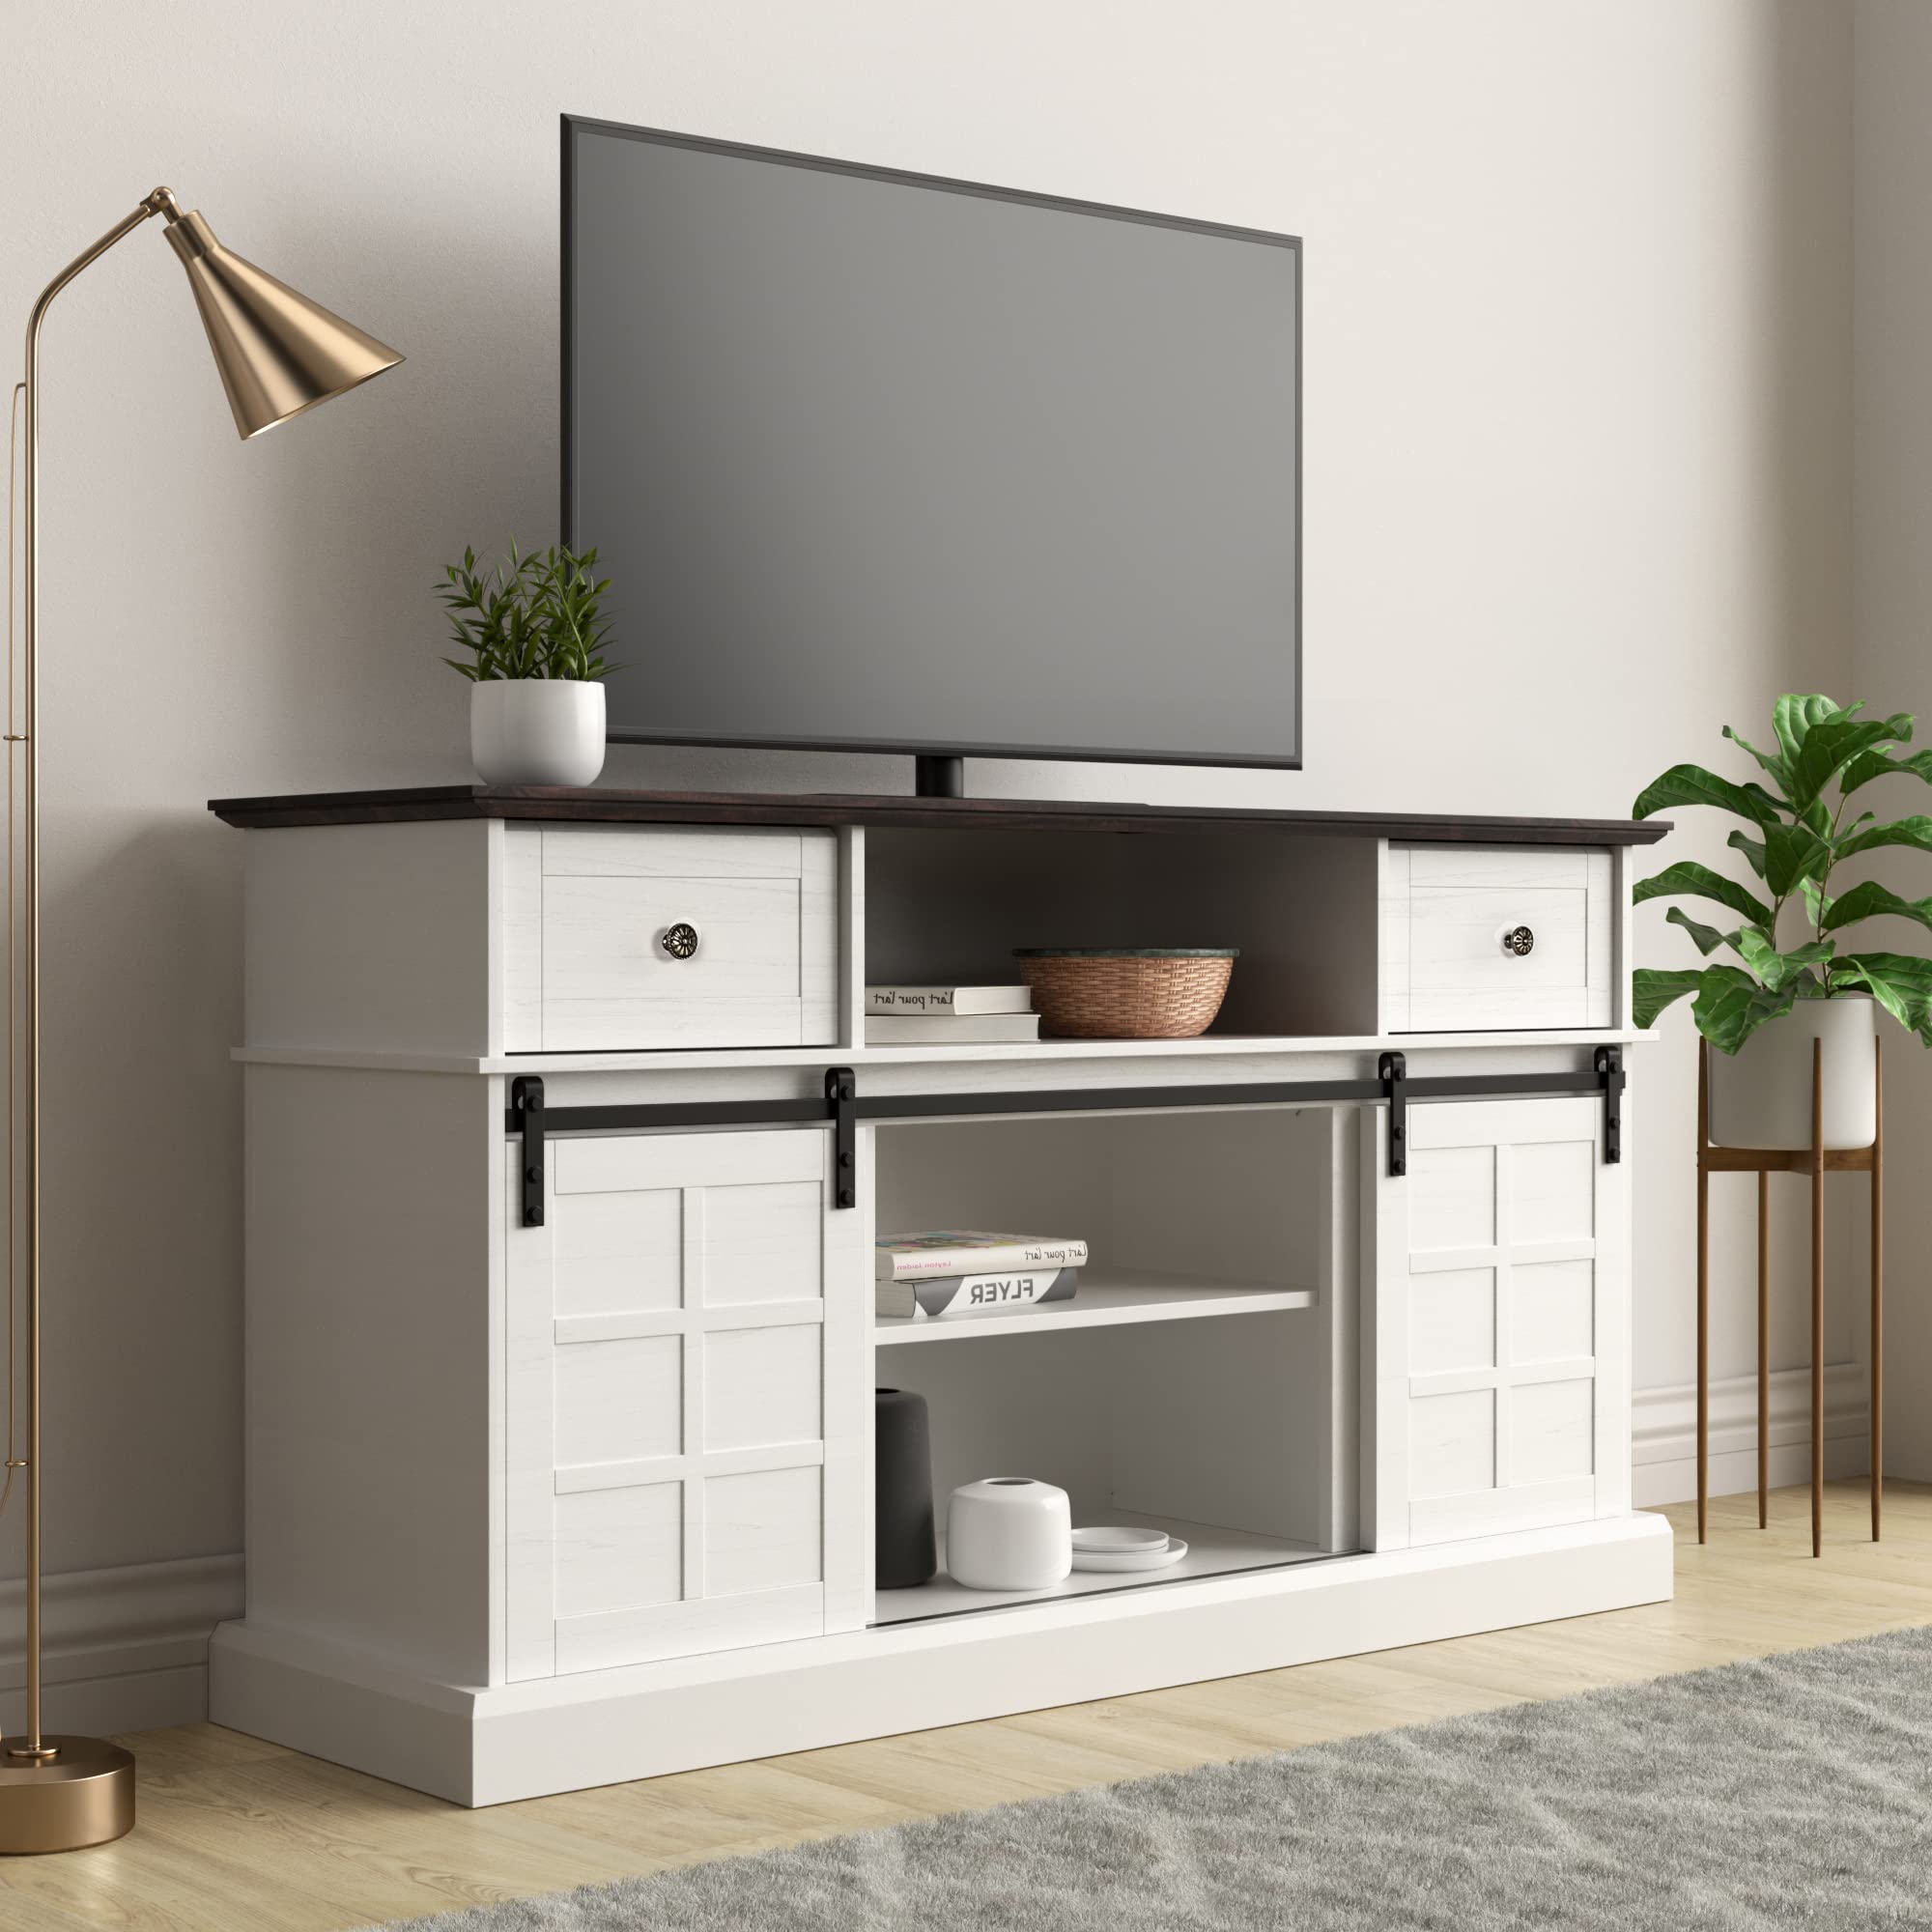 LGHM White TV Stand for 65 inch TV